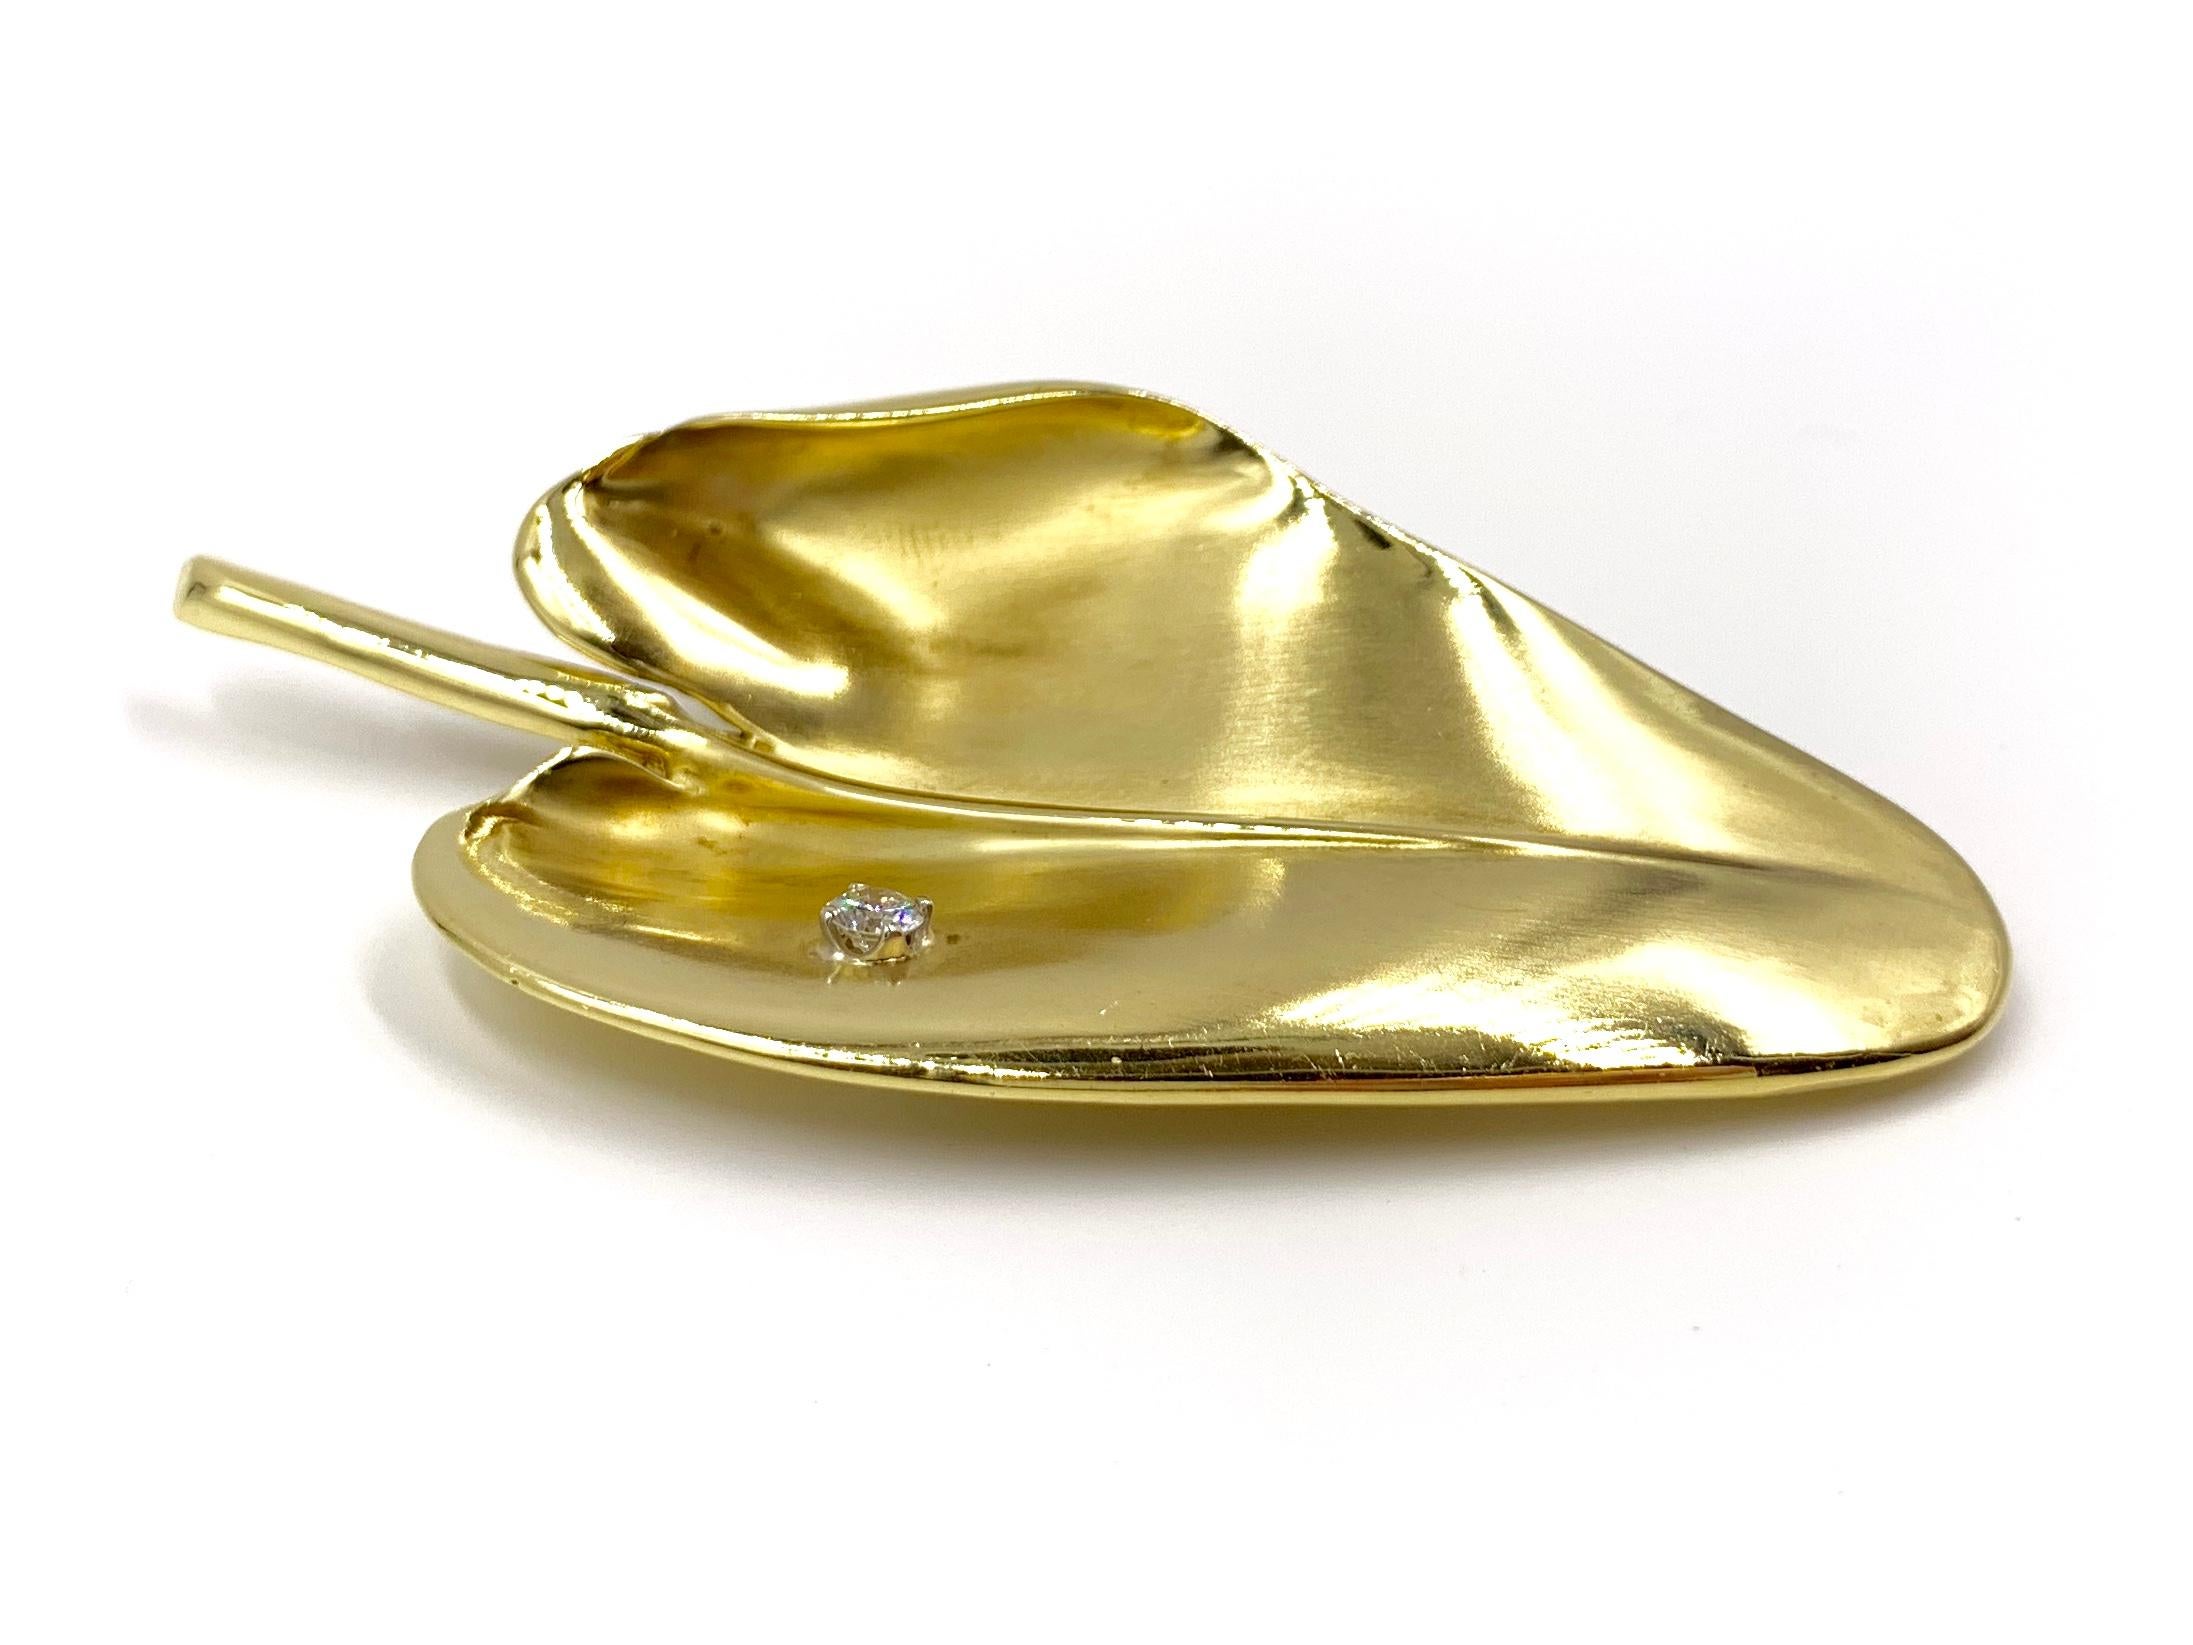 Solid and well made 18 karat yellow gold large leaf brooch with a gorgeous satin finish and a single .20 carat round brilliant diamond by Marlene Stowe. Diamond is approximately F color, VS2 clarity.
Brooch measures 80mm (just over 3